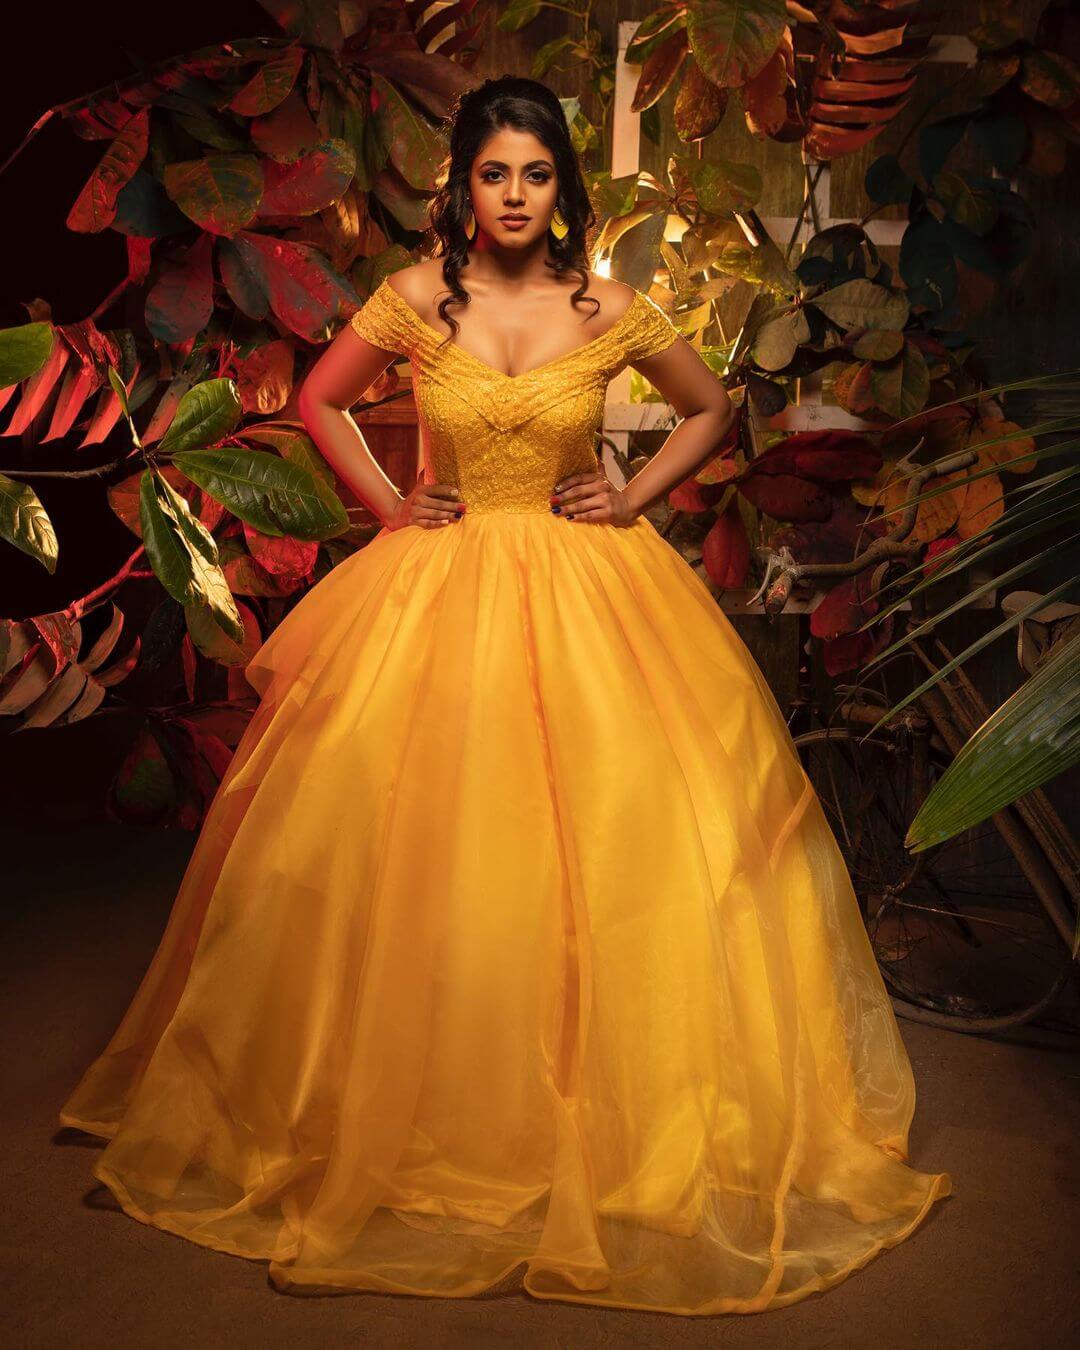 Ineya In Yellow Off-Shoulder Deep Neck Cinderella Gown Gives Us Princess Vibes